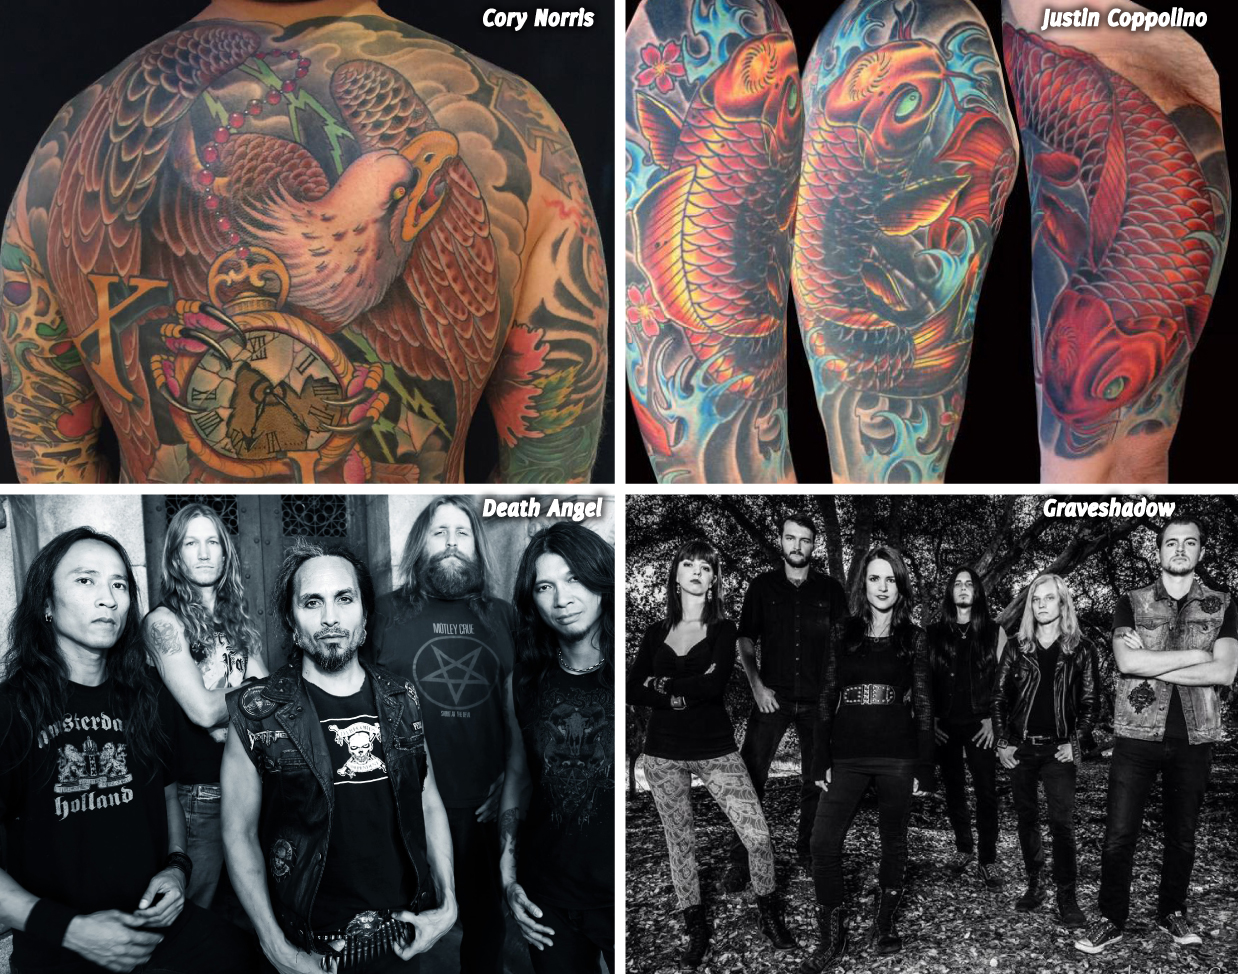 And Justice For Art Presents Tattoos Album Covers  in Metal News  Metal  Undergroundcom 